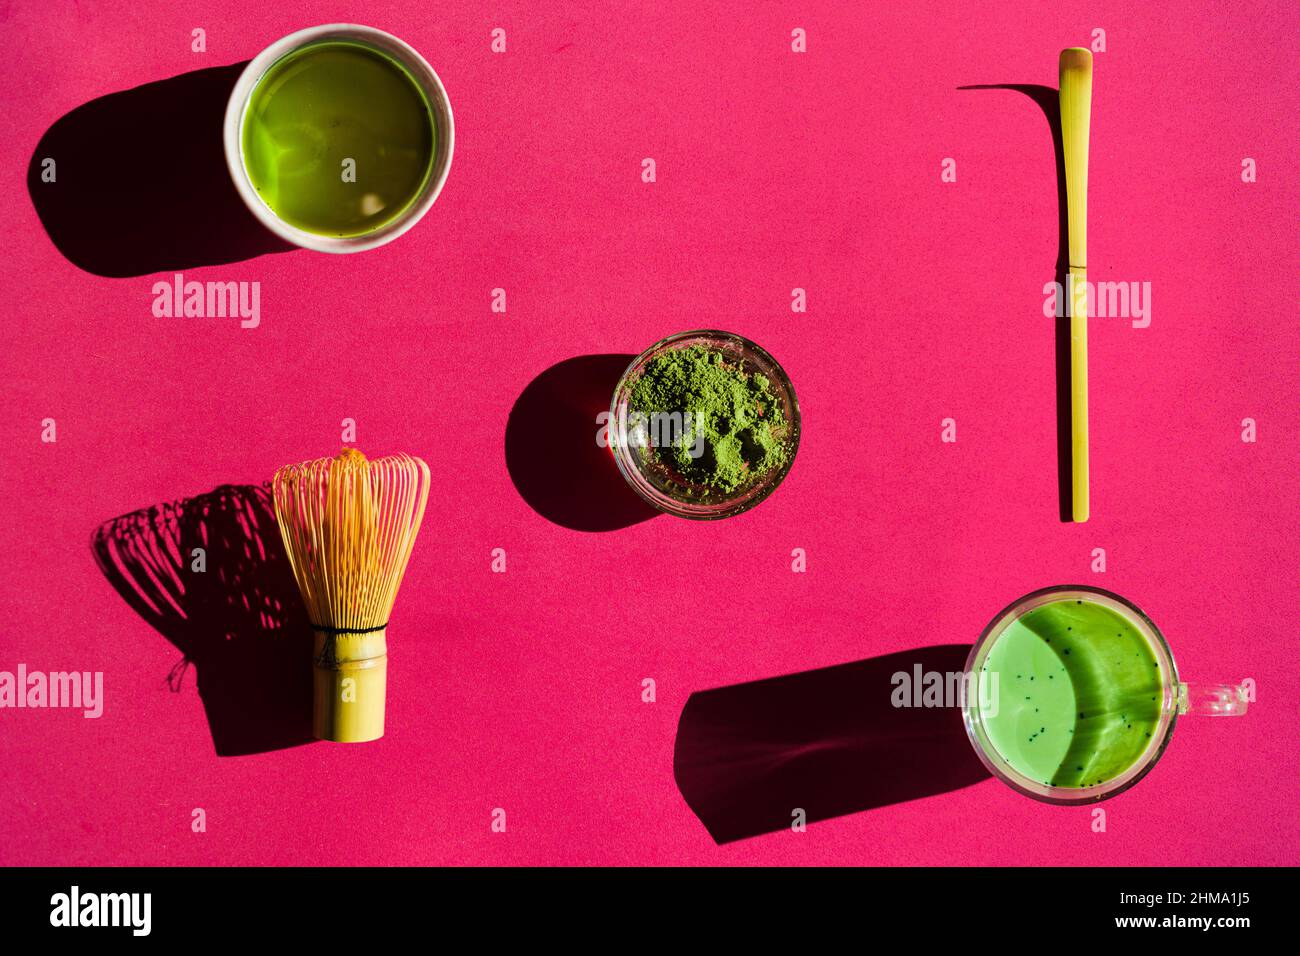 Top view of bright background of glass of green tea and dried matcha with bamboo chasen and chashaku on pink surface Stock Photo